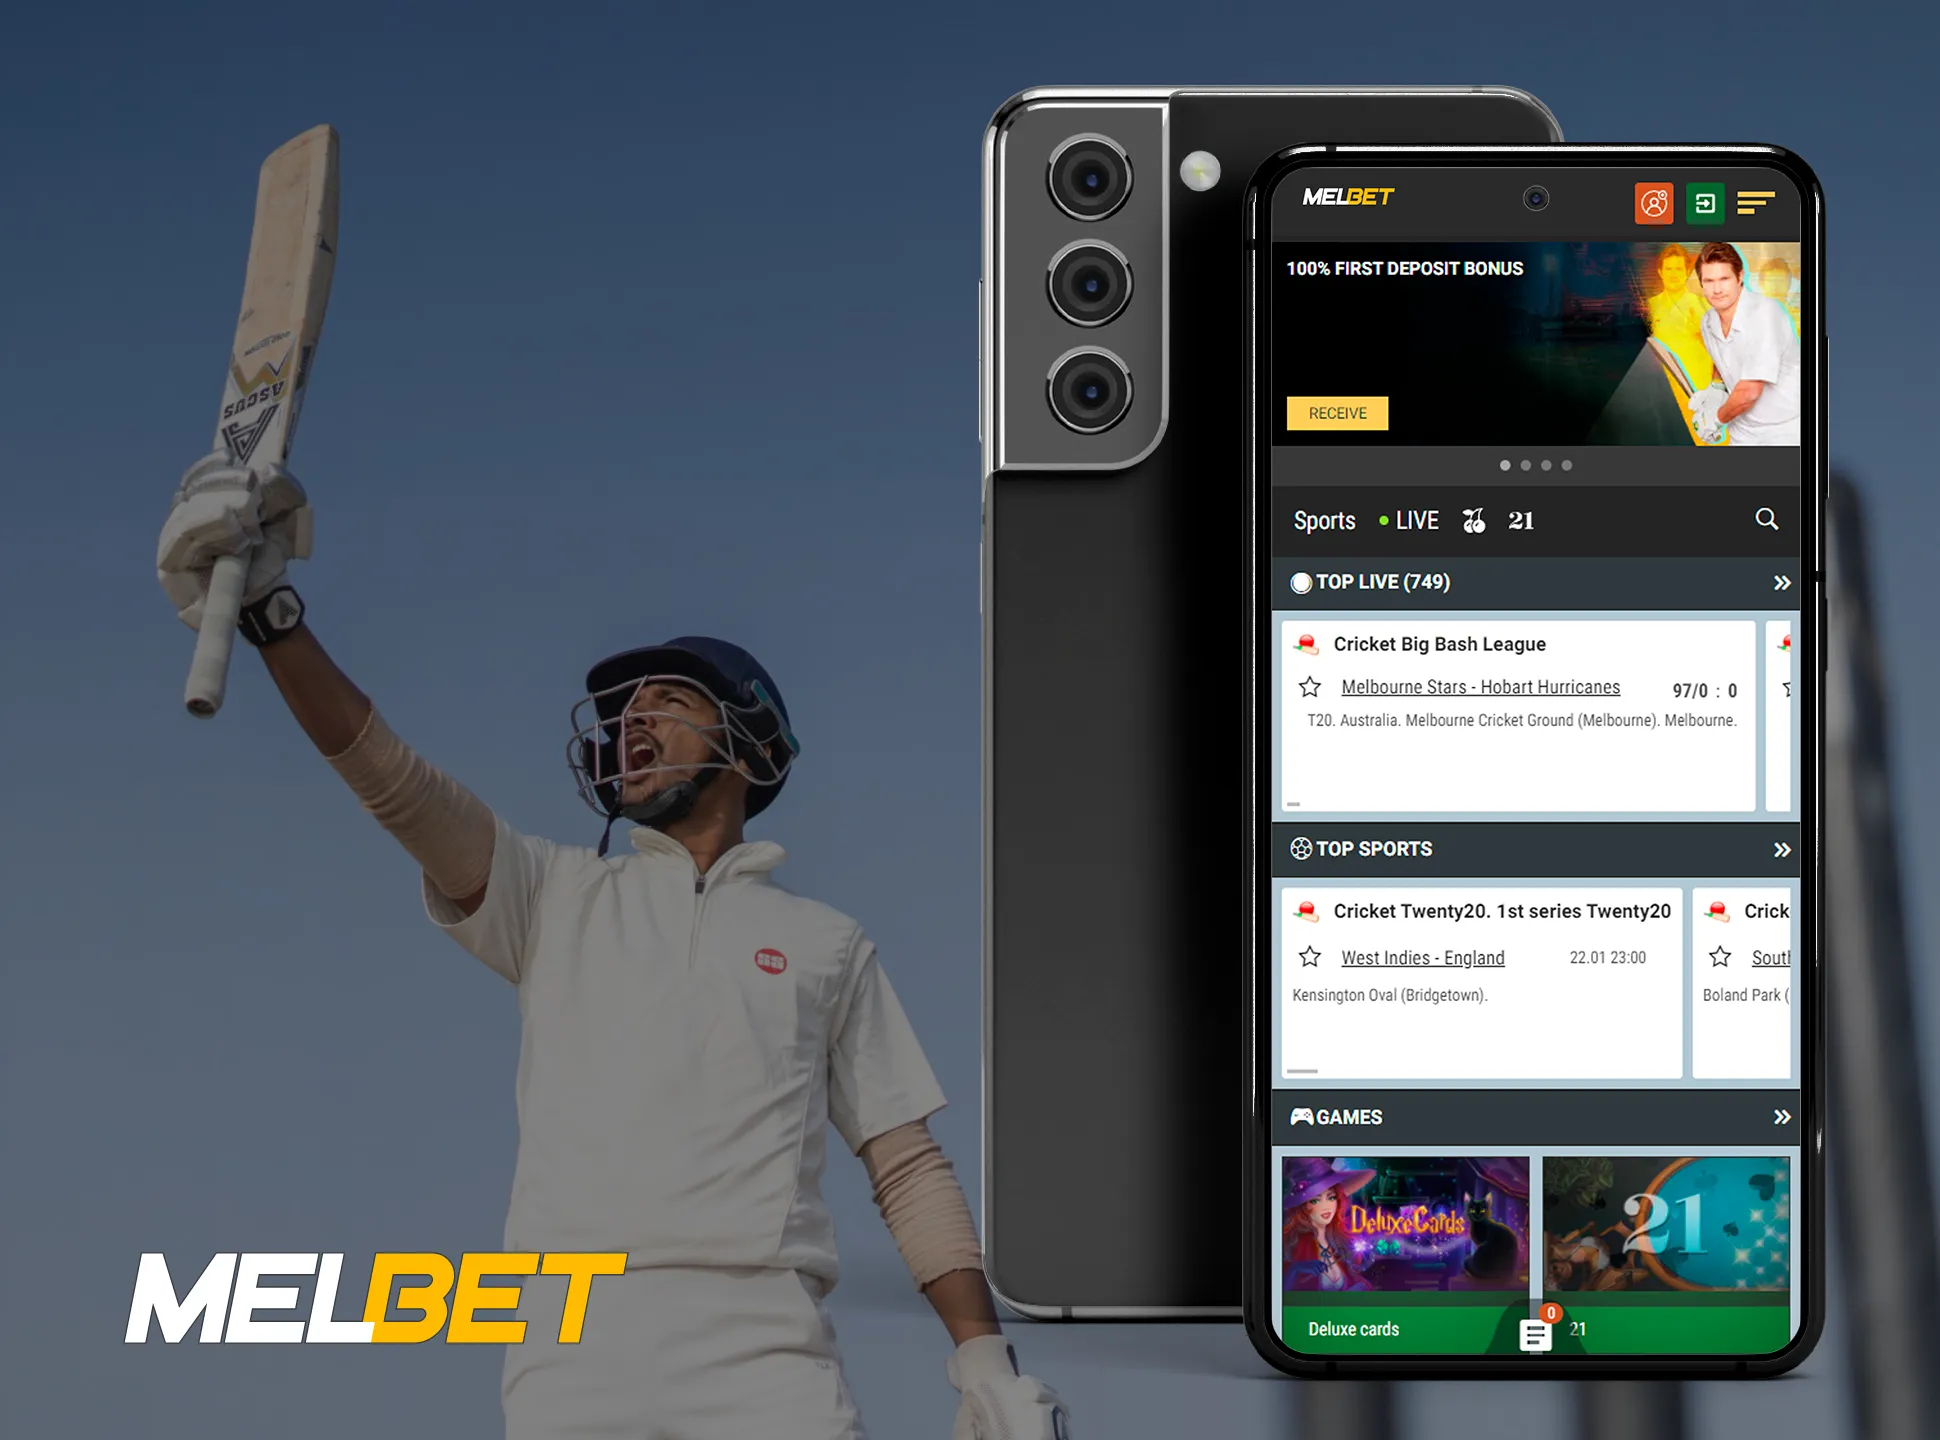 Start betting on your favourite cricket team with Melbet.